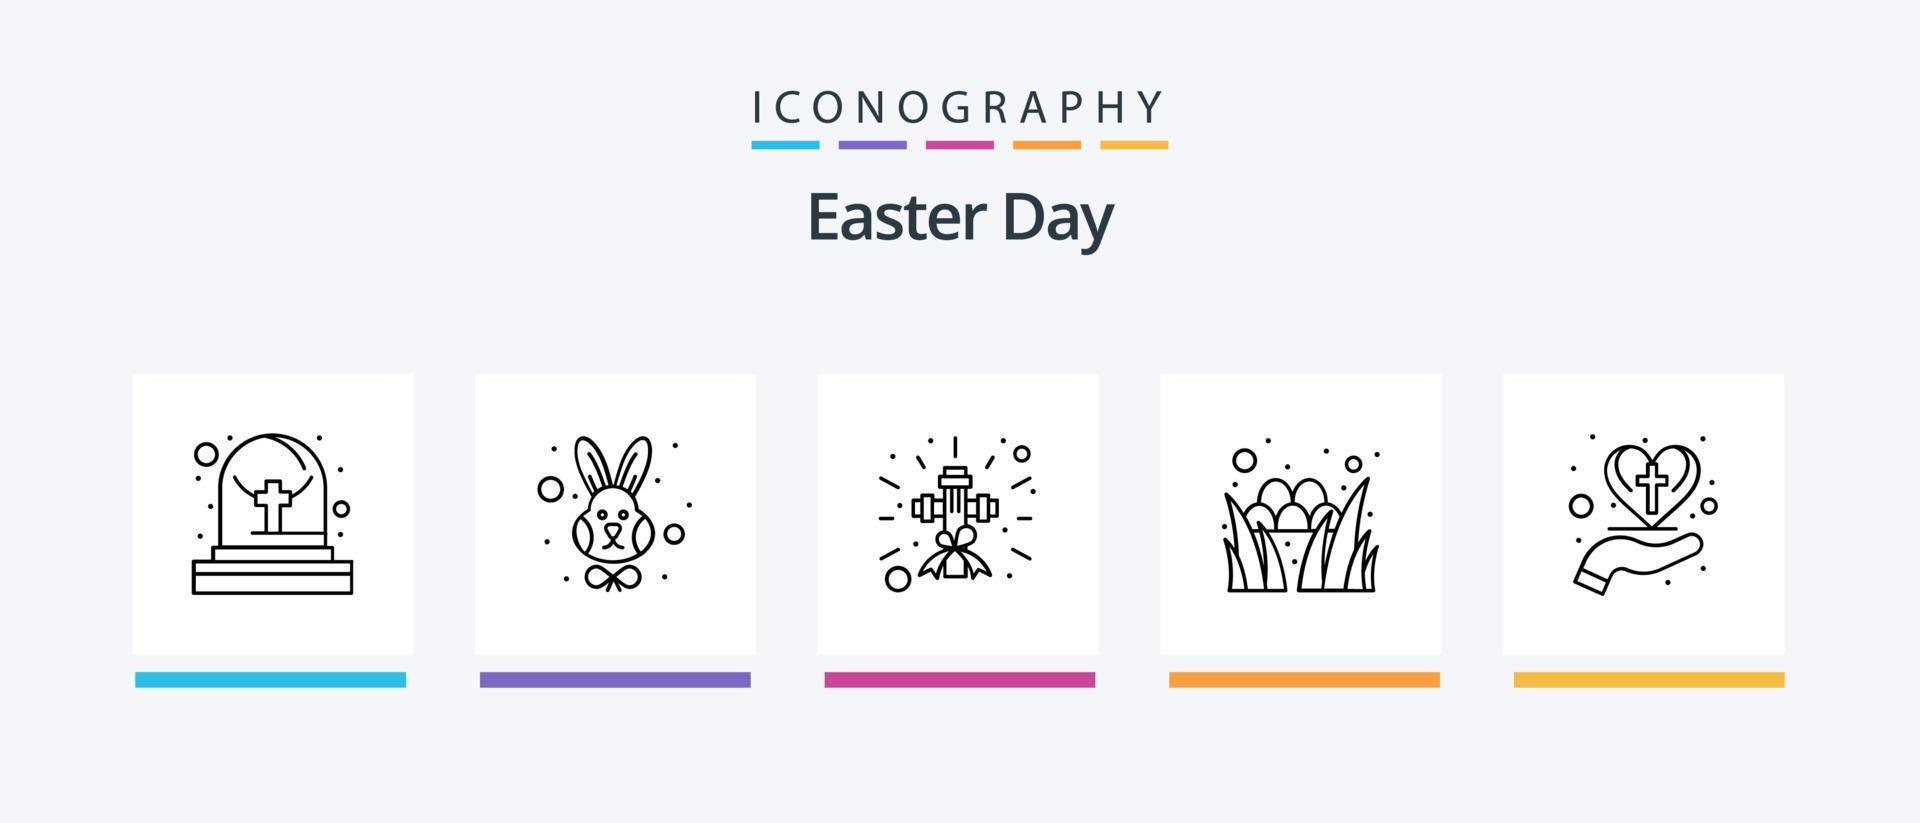 Easter Line 5 Icon Pack Including fried. spring. cross. sheep. easter. Creative Icons Design vector